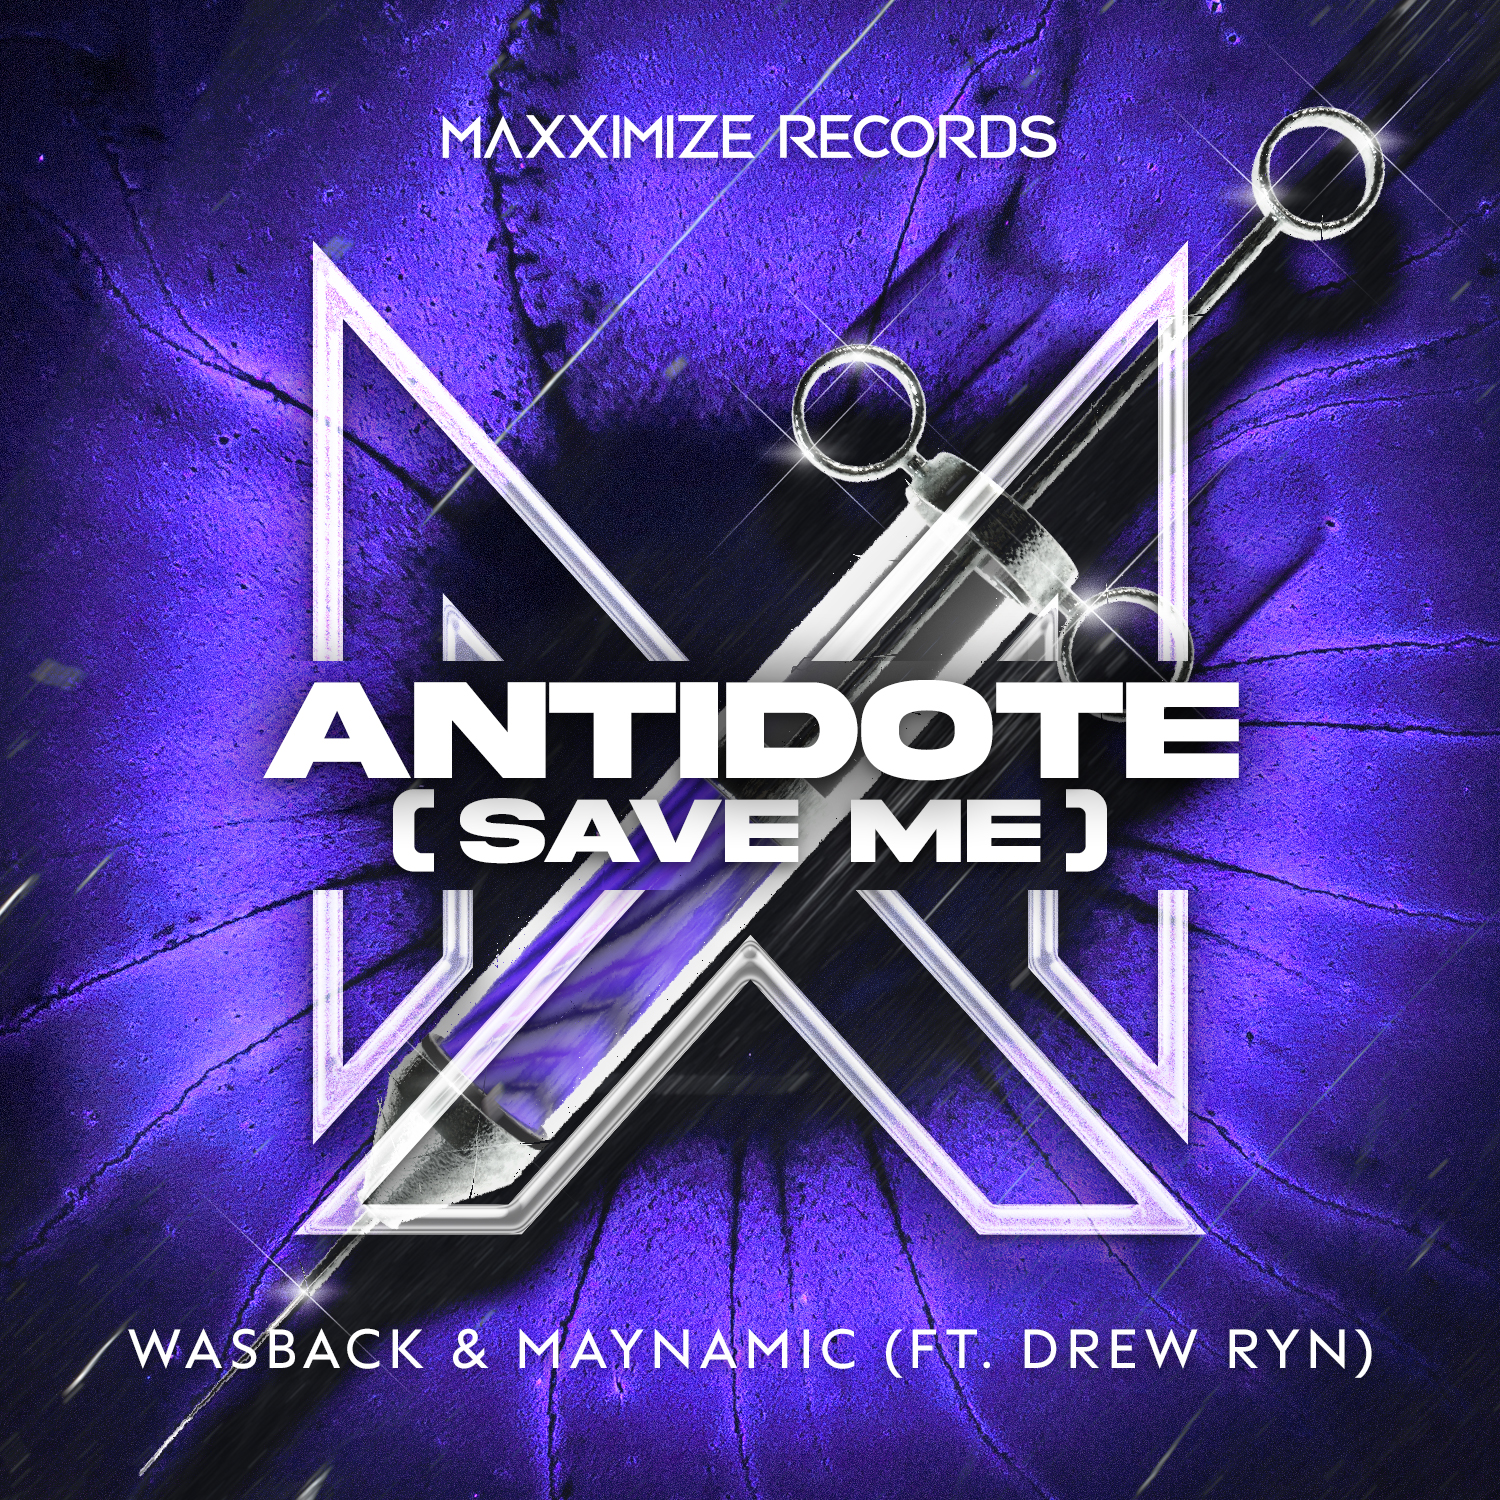 Wasback & Maynamic ft. featuring Drew Ryn Antidote (Save Me) cover artwork